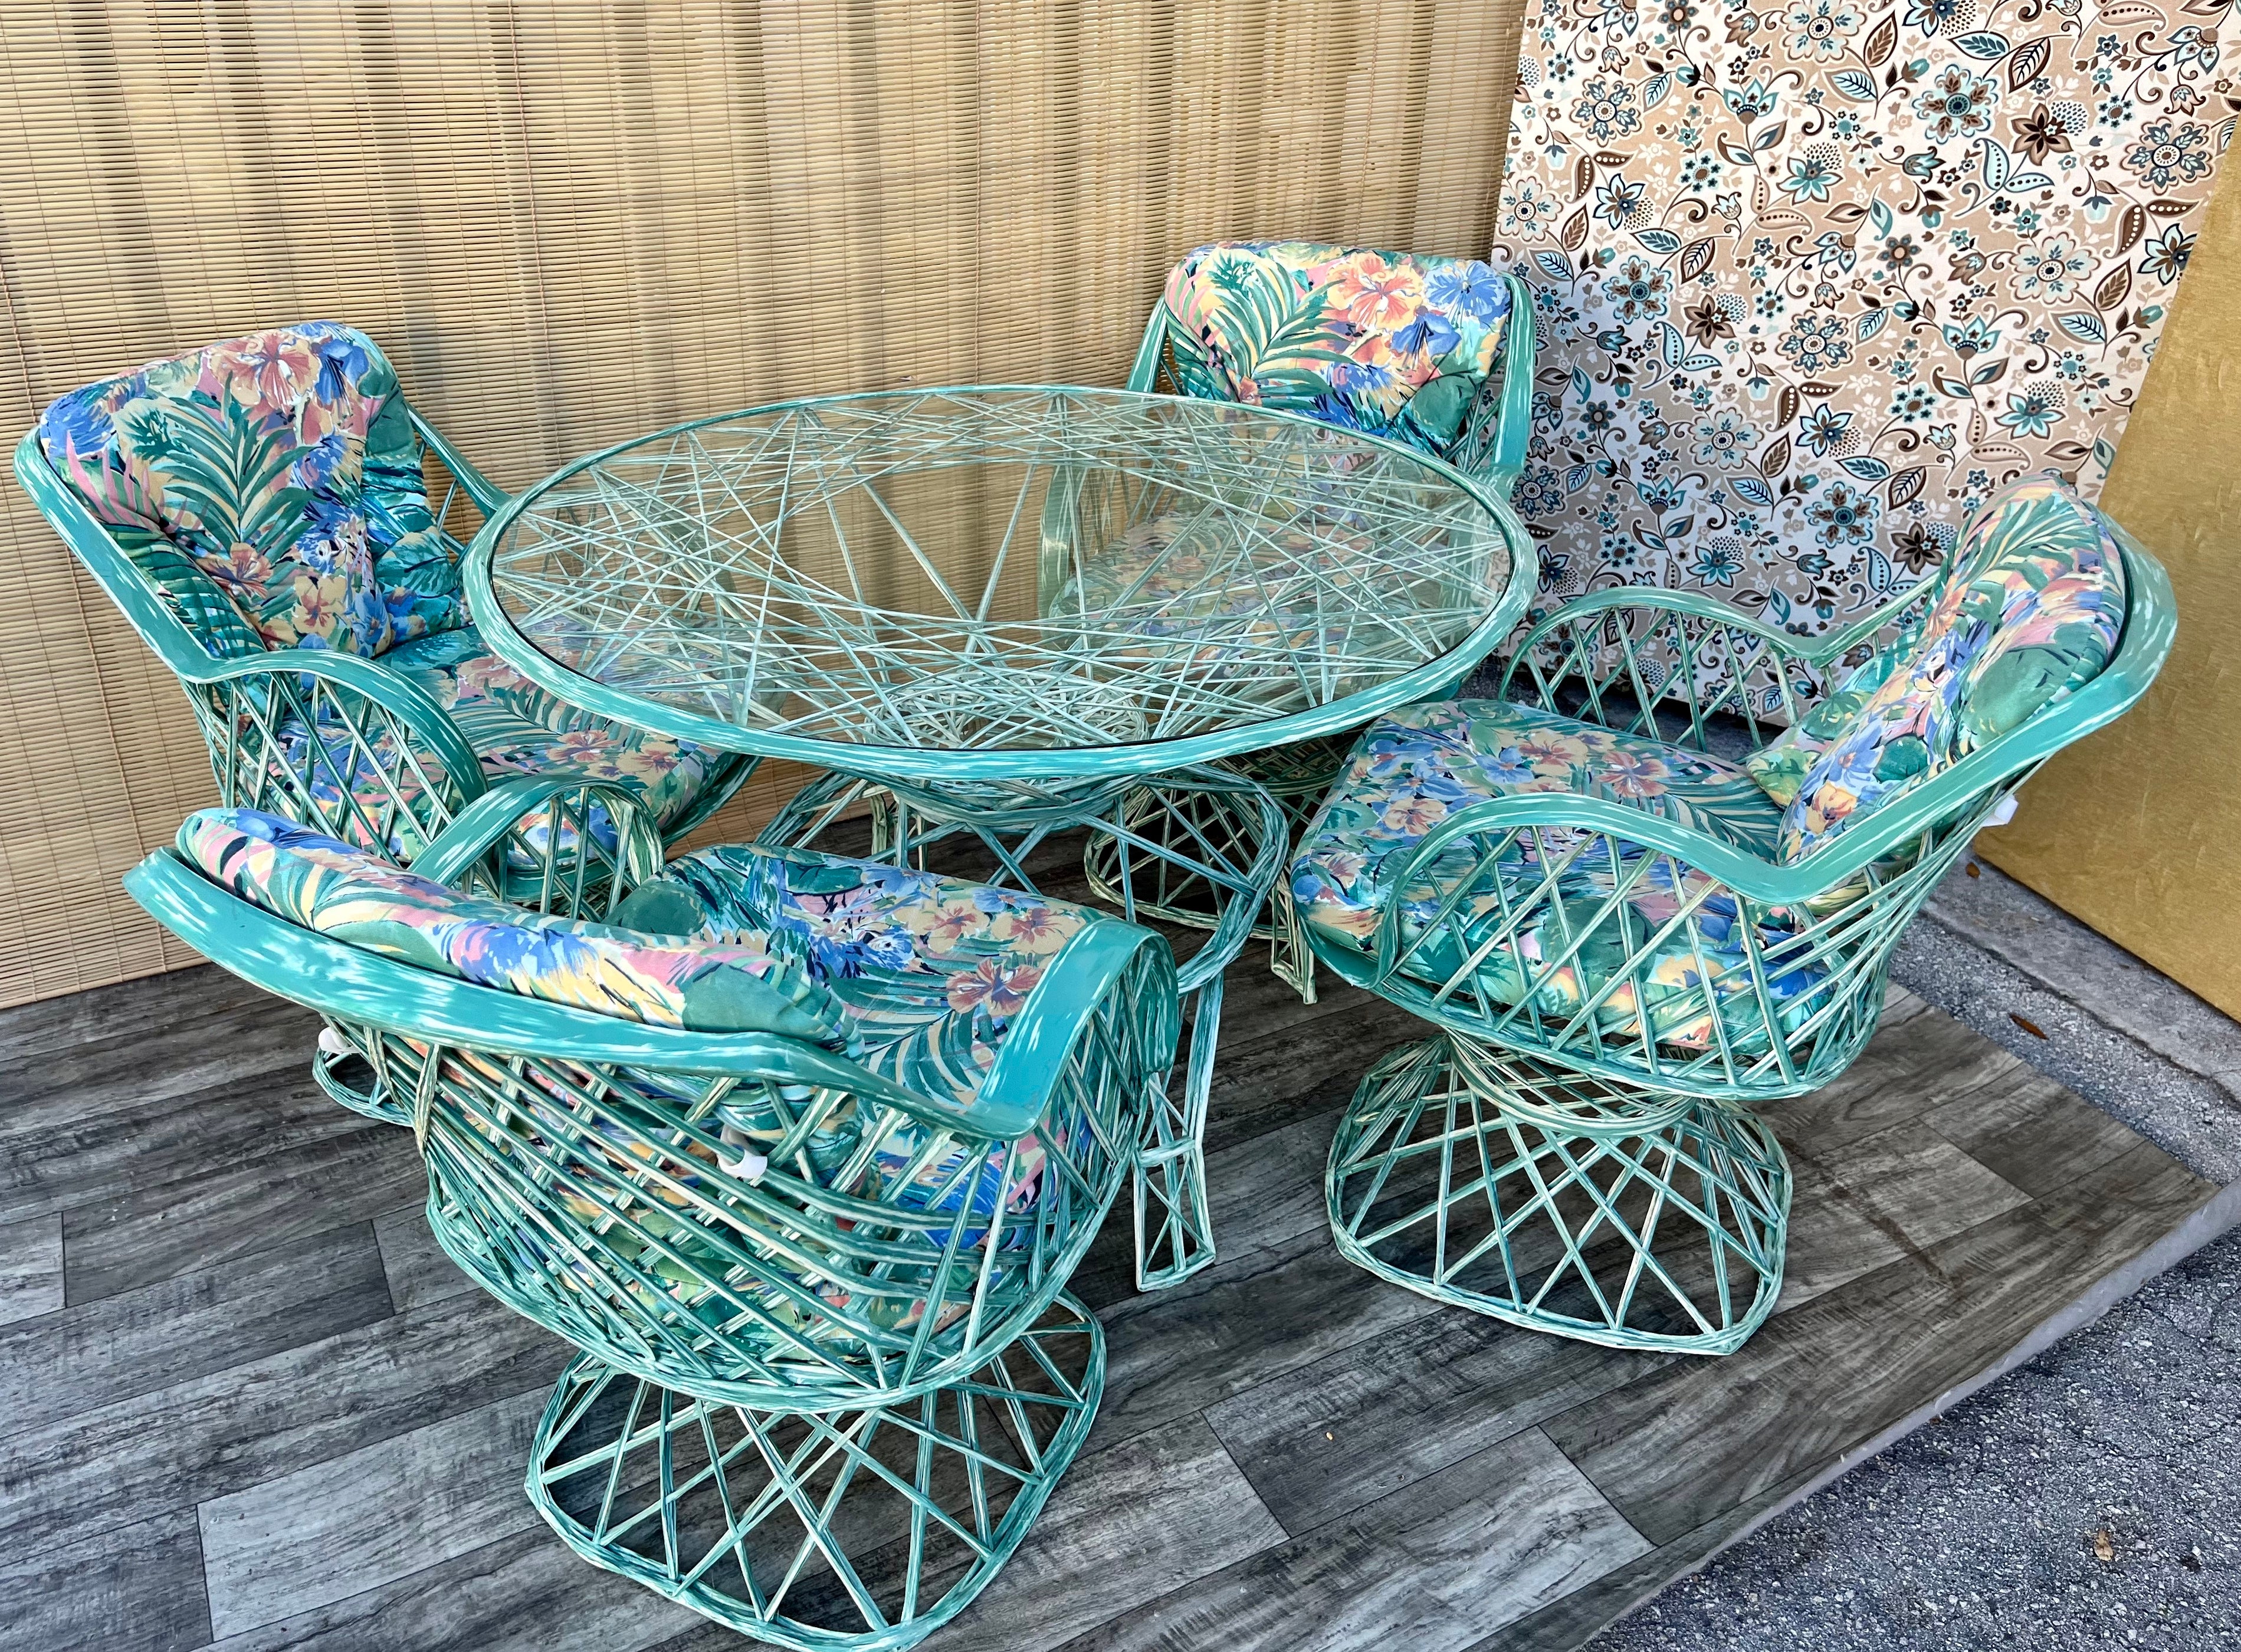 Vintage MId-Century Modern Russell Woodard Spun Fiberglass Outdoor Dining Set Circa 1970s 
This set includes four Spun Fiberglass dining chairs with the original removable cushions and a round Dining Table with a Glass top. 
Made from spun